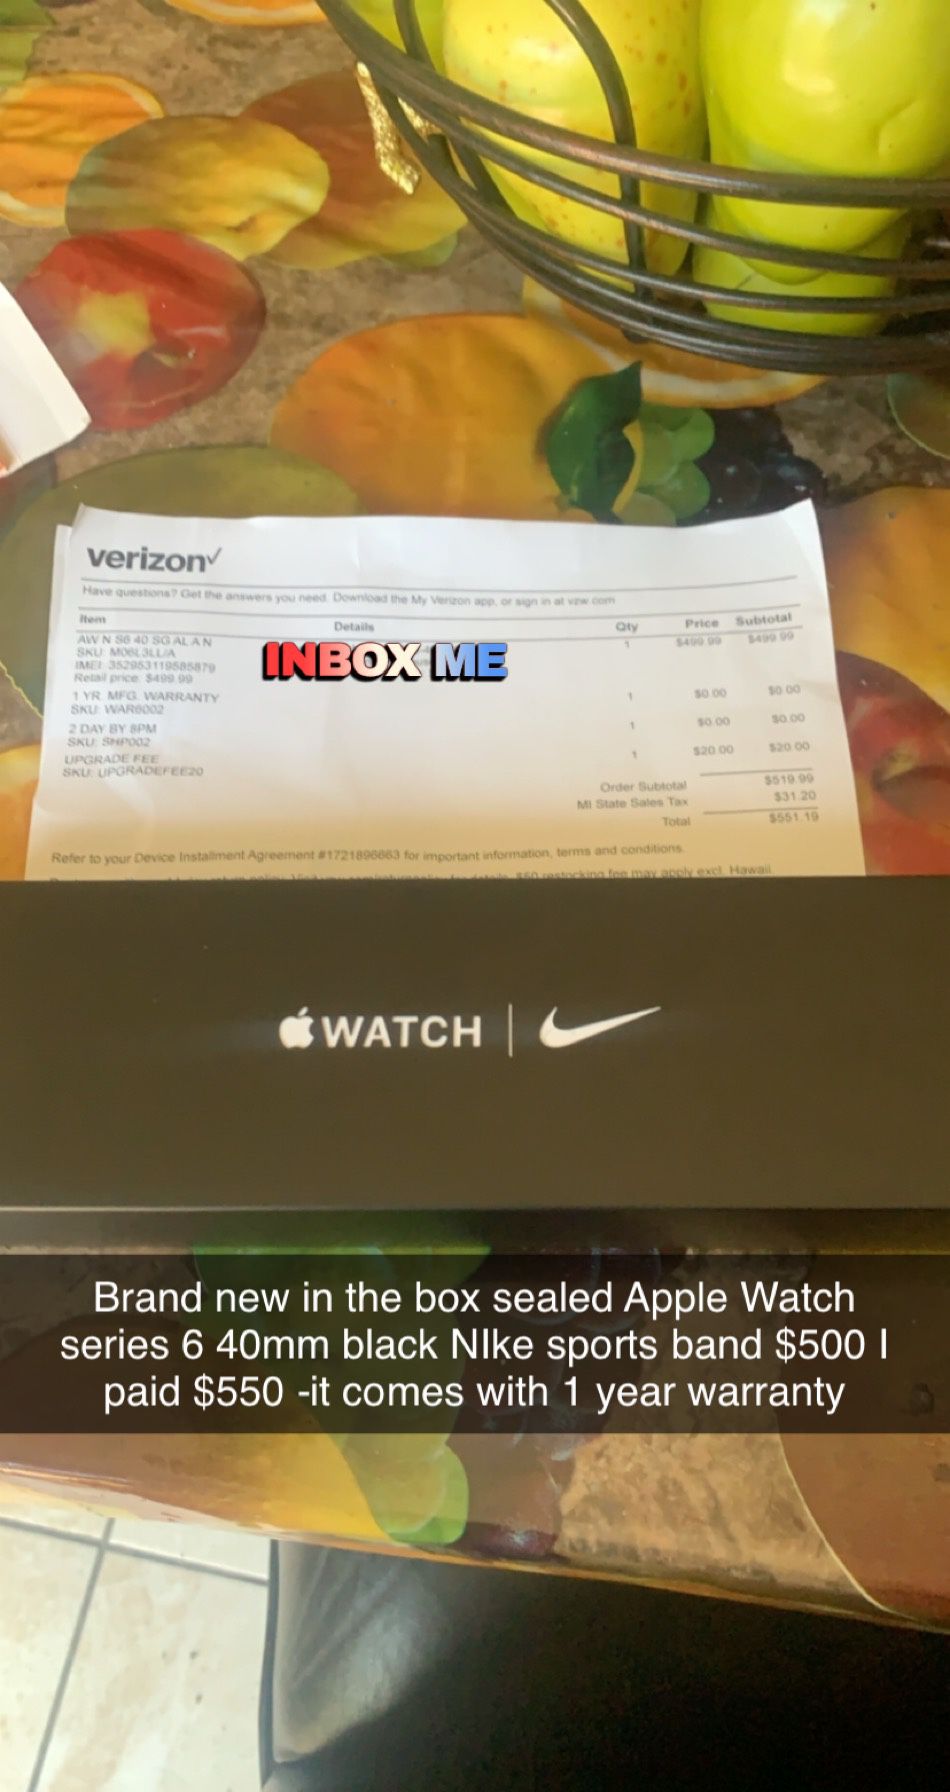 Apple Watch series 6 40mm Nike sport-band “brand new” “Sealed”